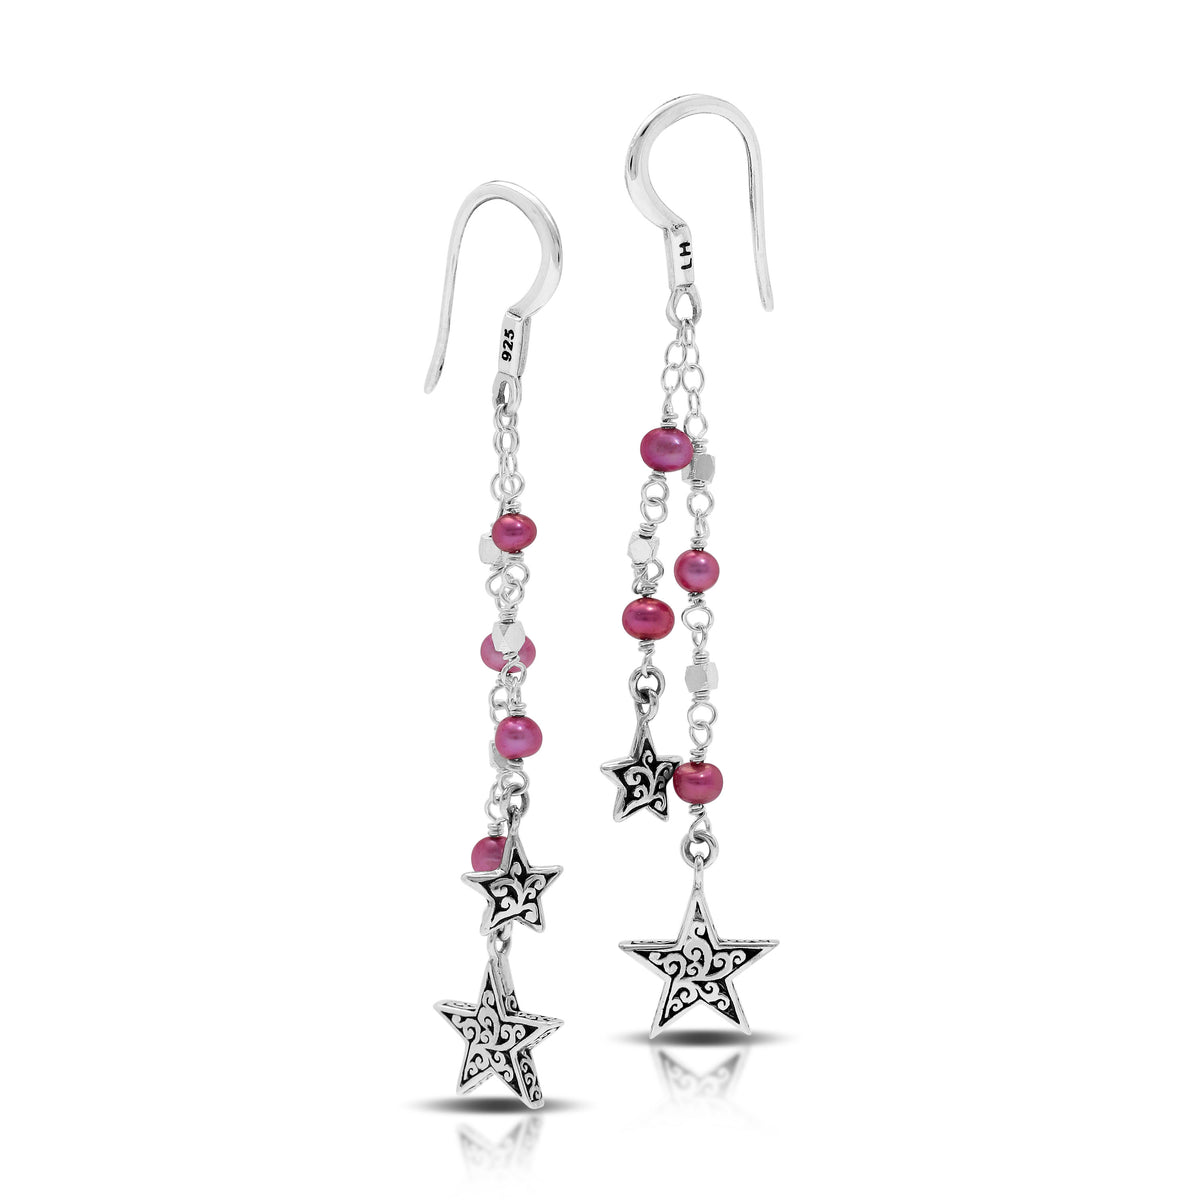 Pink Pearl Bead (4mm) with Signature Scroll Star Charm (12mm x 13mm) Wire-Wrapped Drop Fishhook Earrings. 56mm Drop